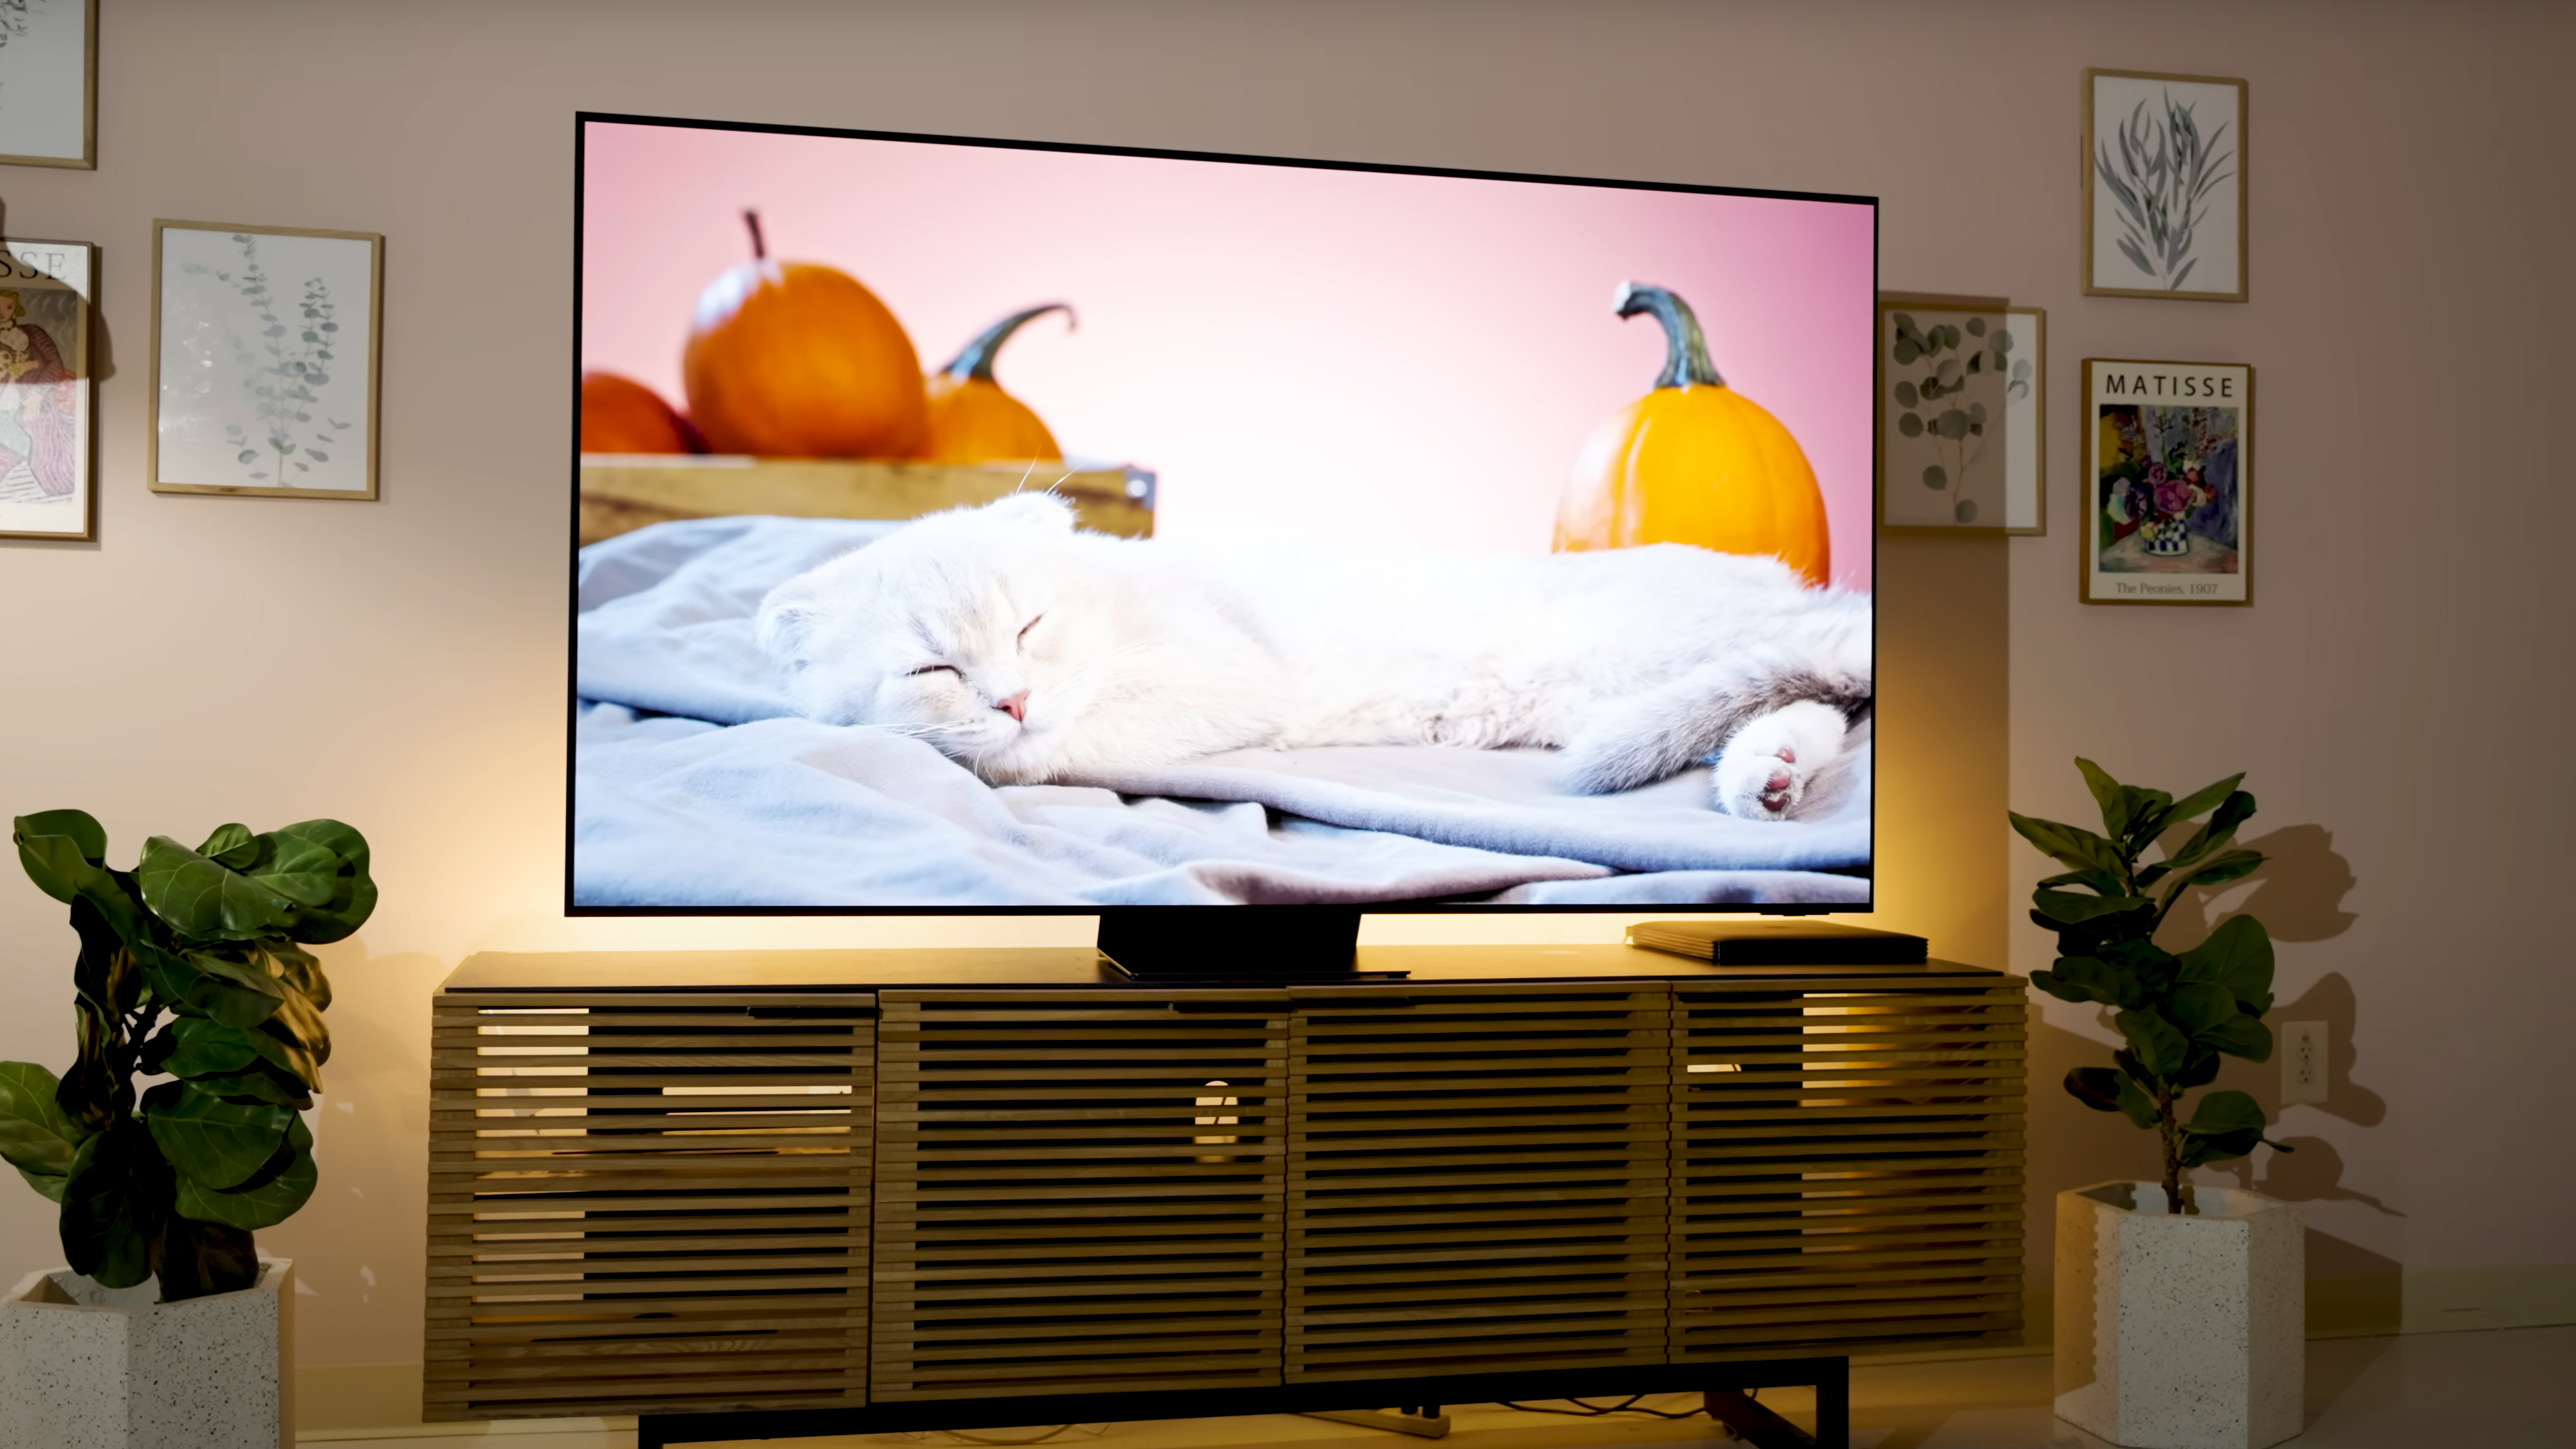 A scene of brightly colored produce is shown on a Samsung S95D OLED Tv.